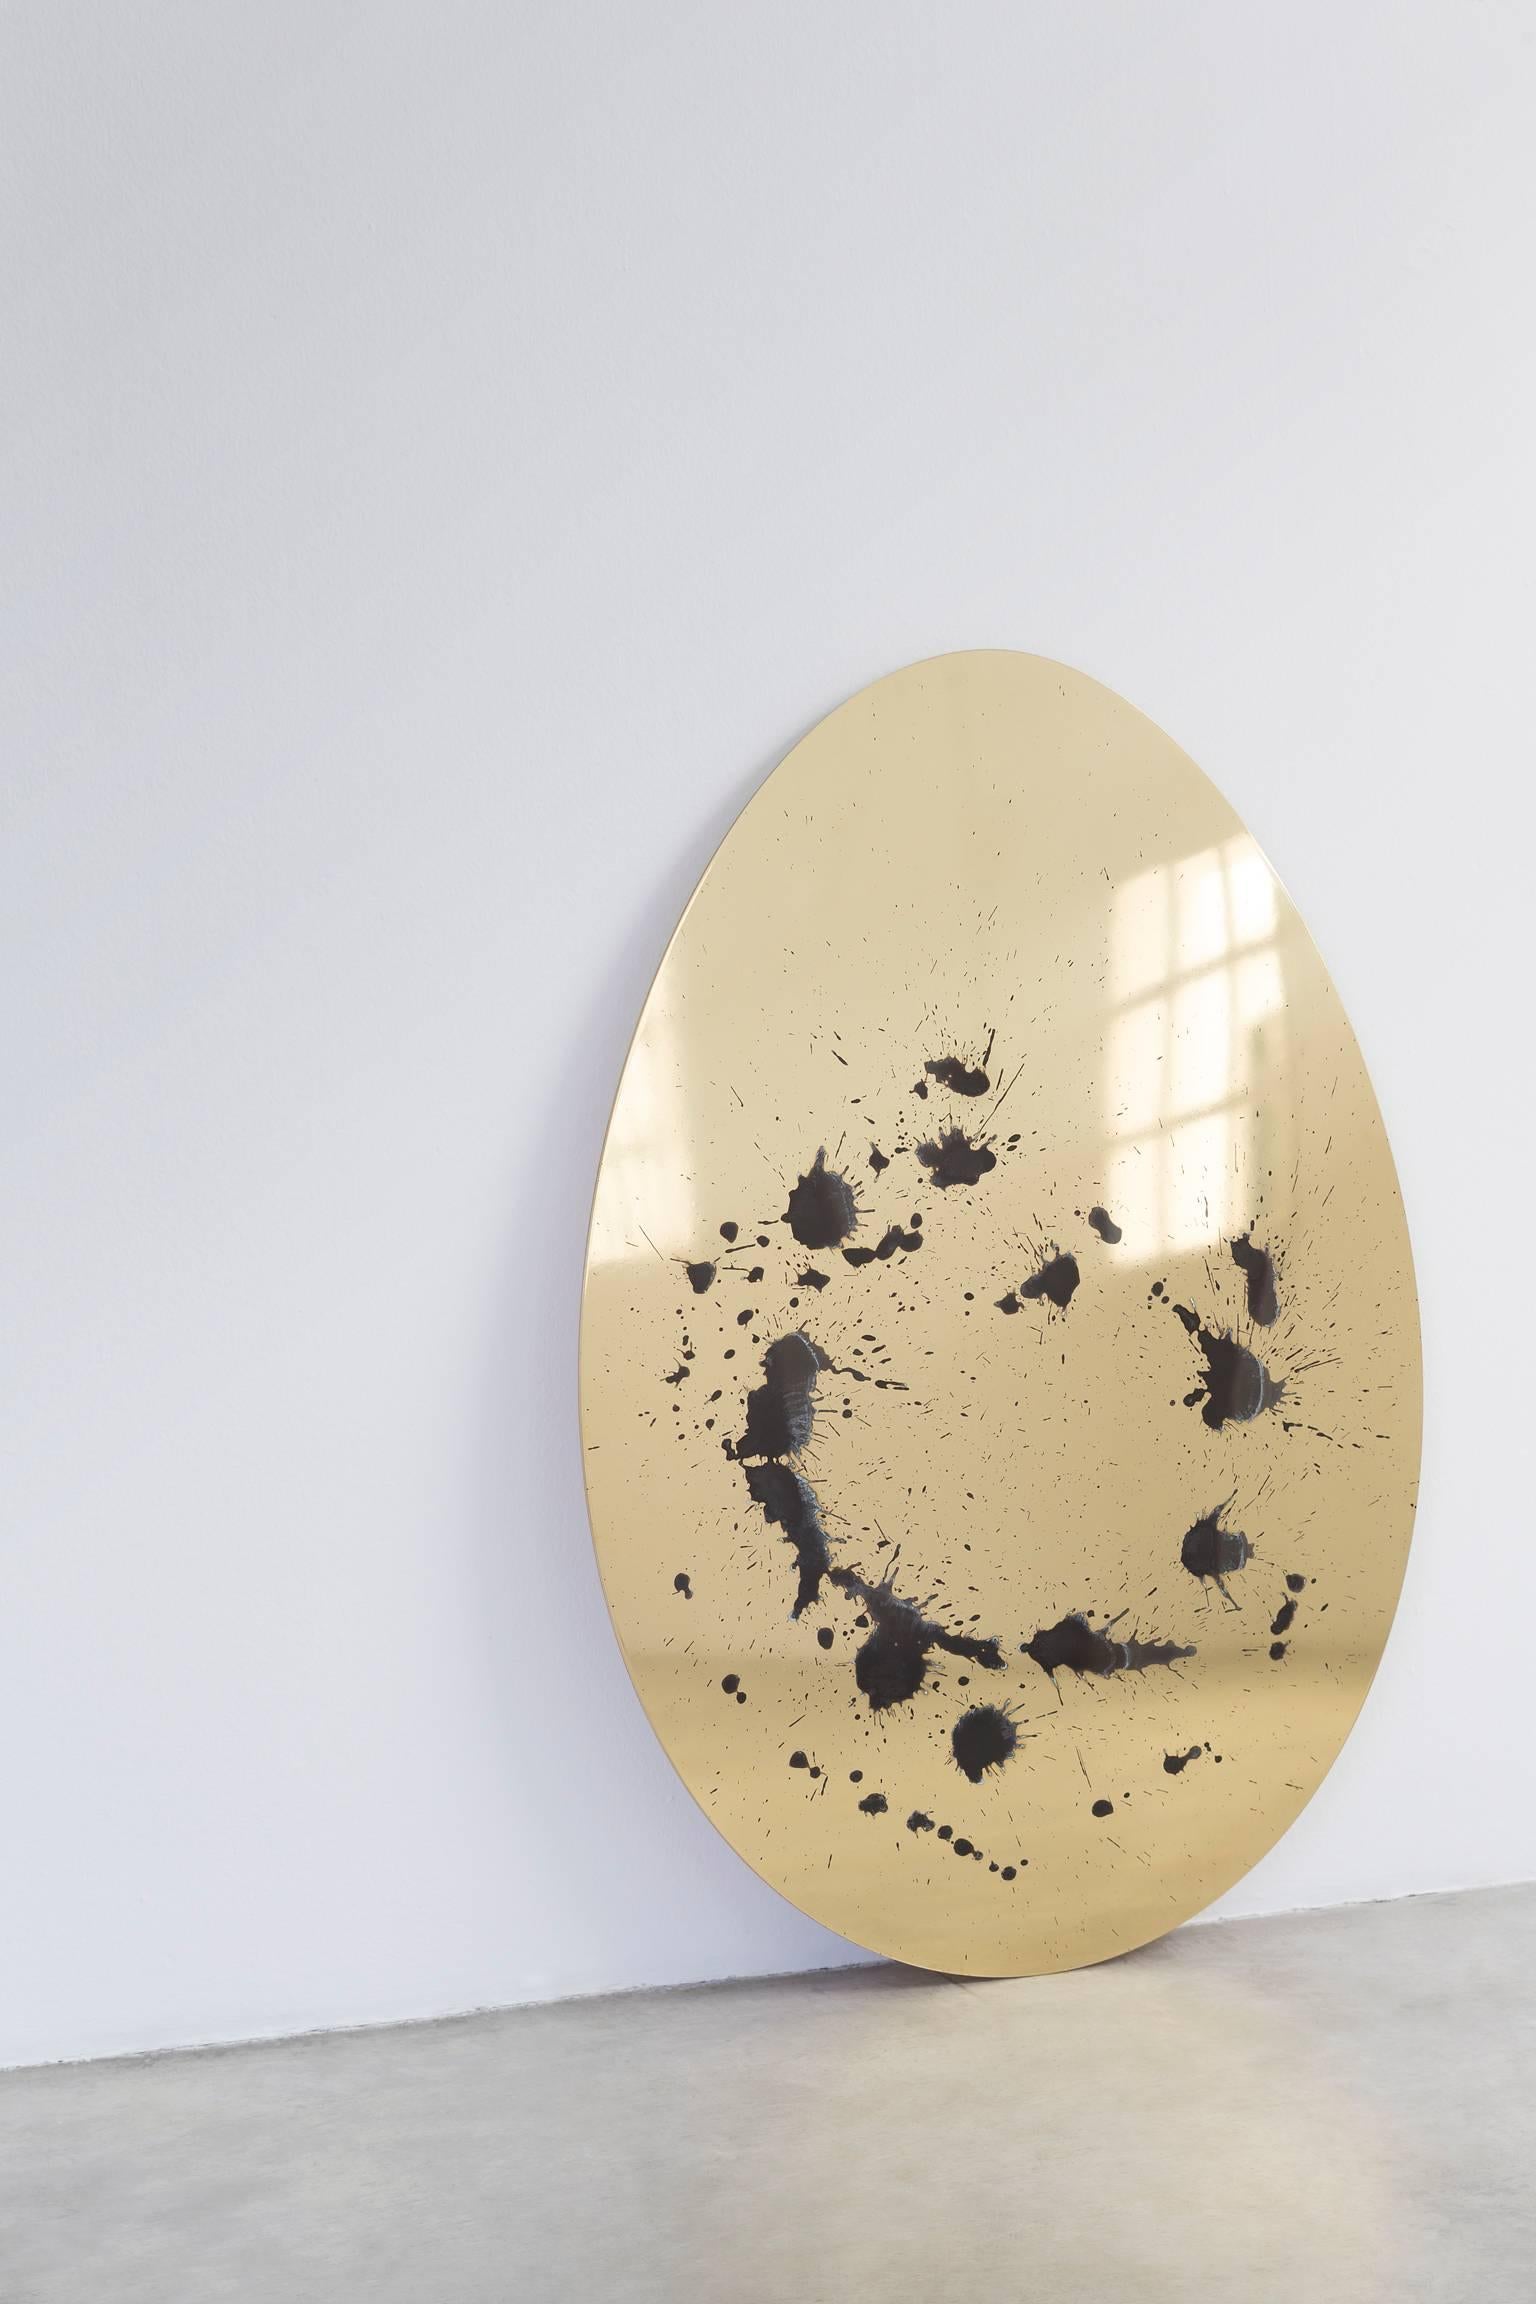 Modern Big Oval Mirrors, Model SFG 12-L, Limited Edition of 5 For Sale